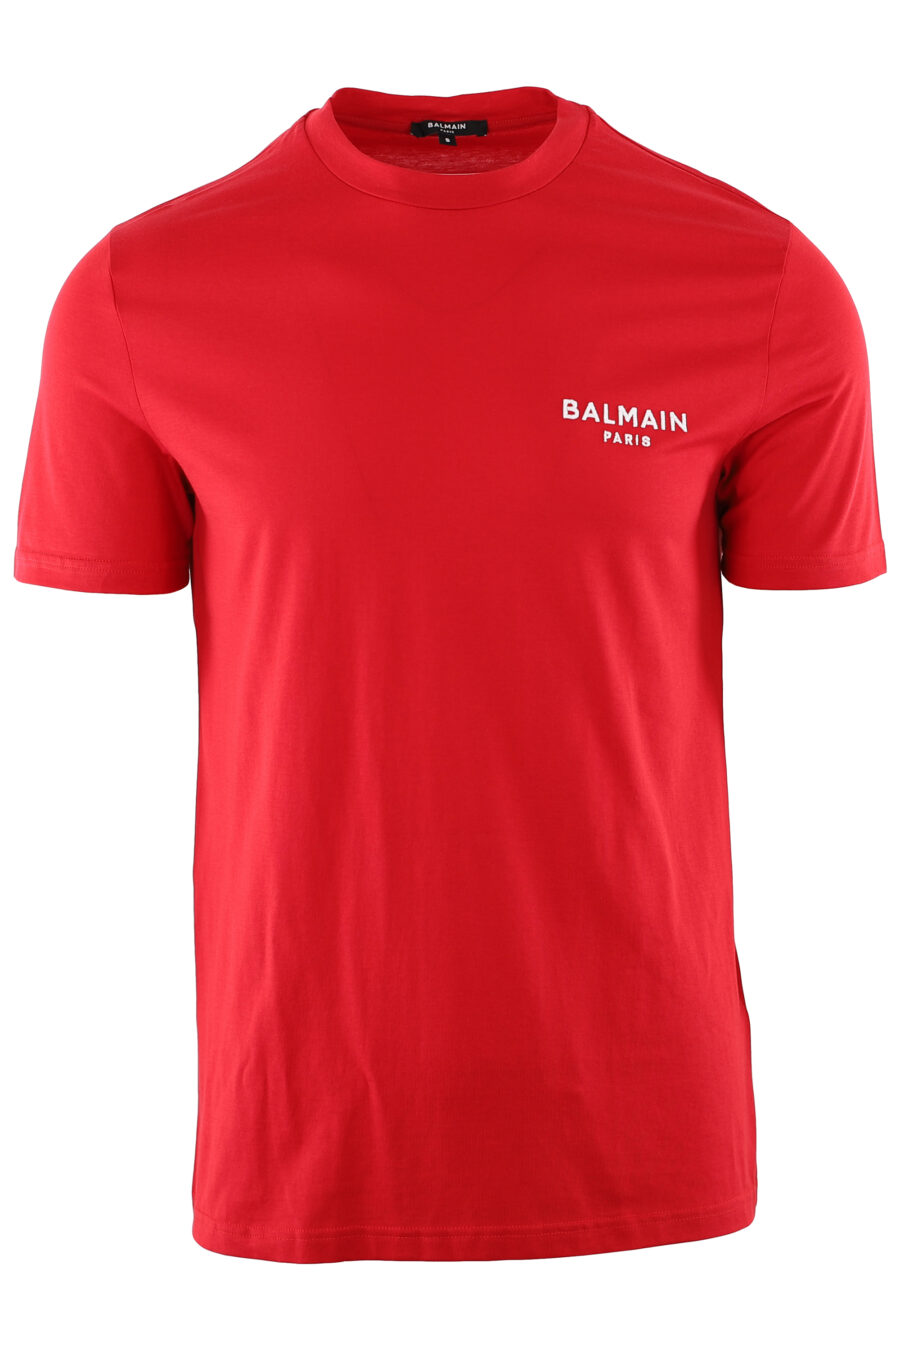 Red T-shirt with white embroidered logo - IMG 7409